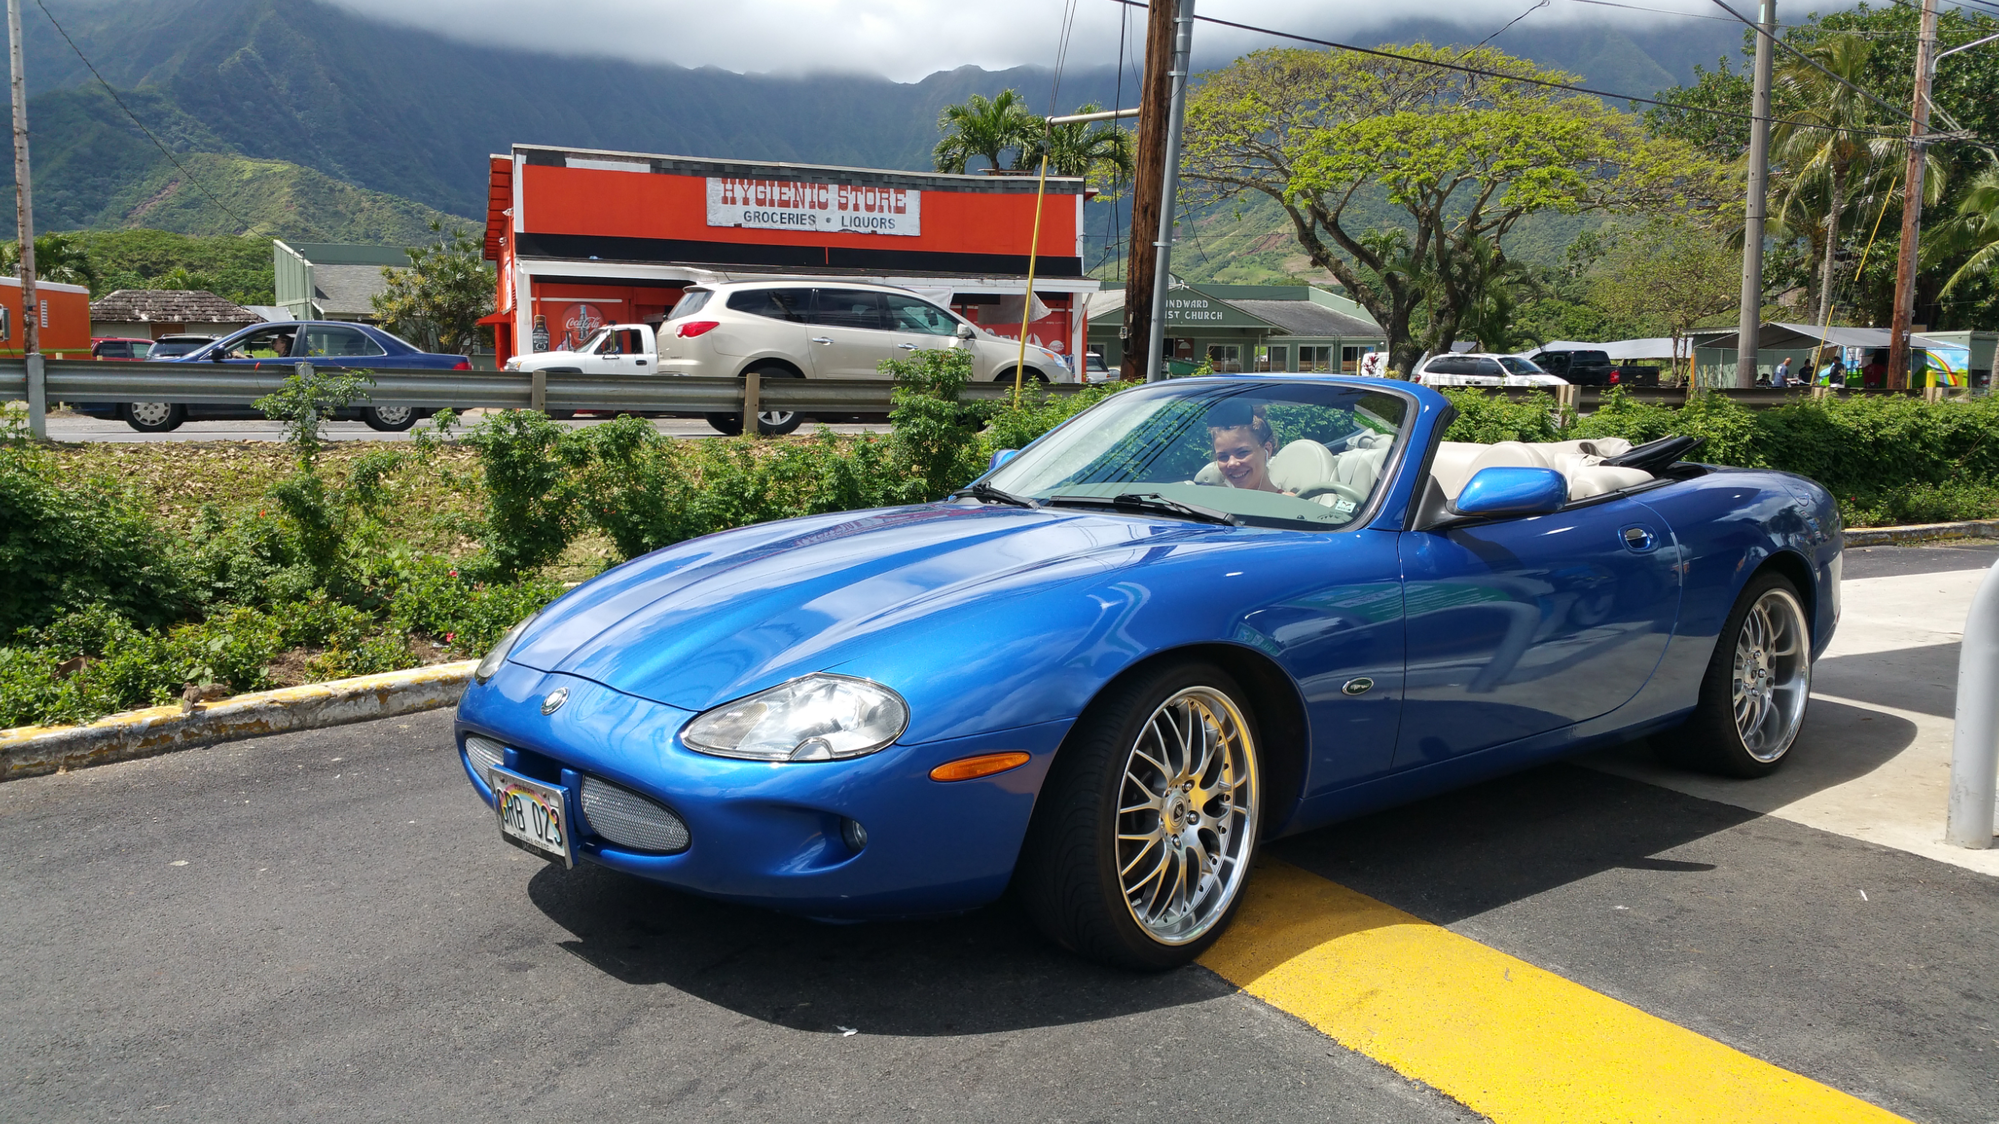 New XK8 Owner: Before and After Pics - Jaguar Forums ...